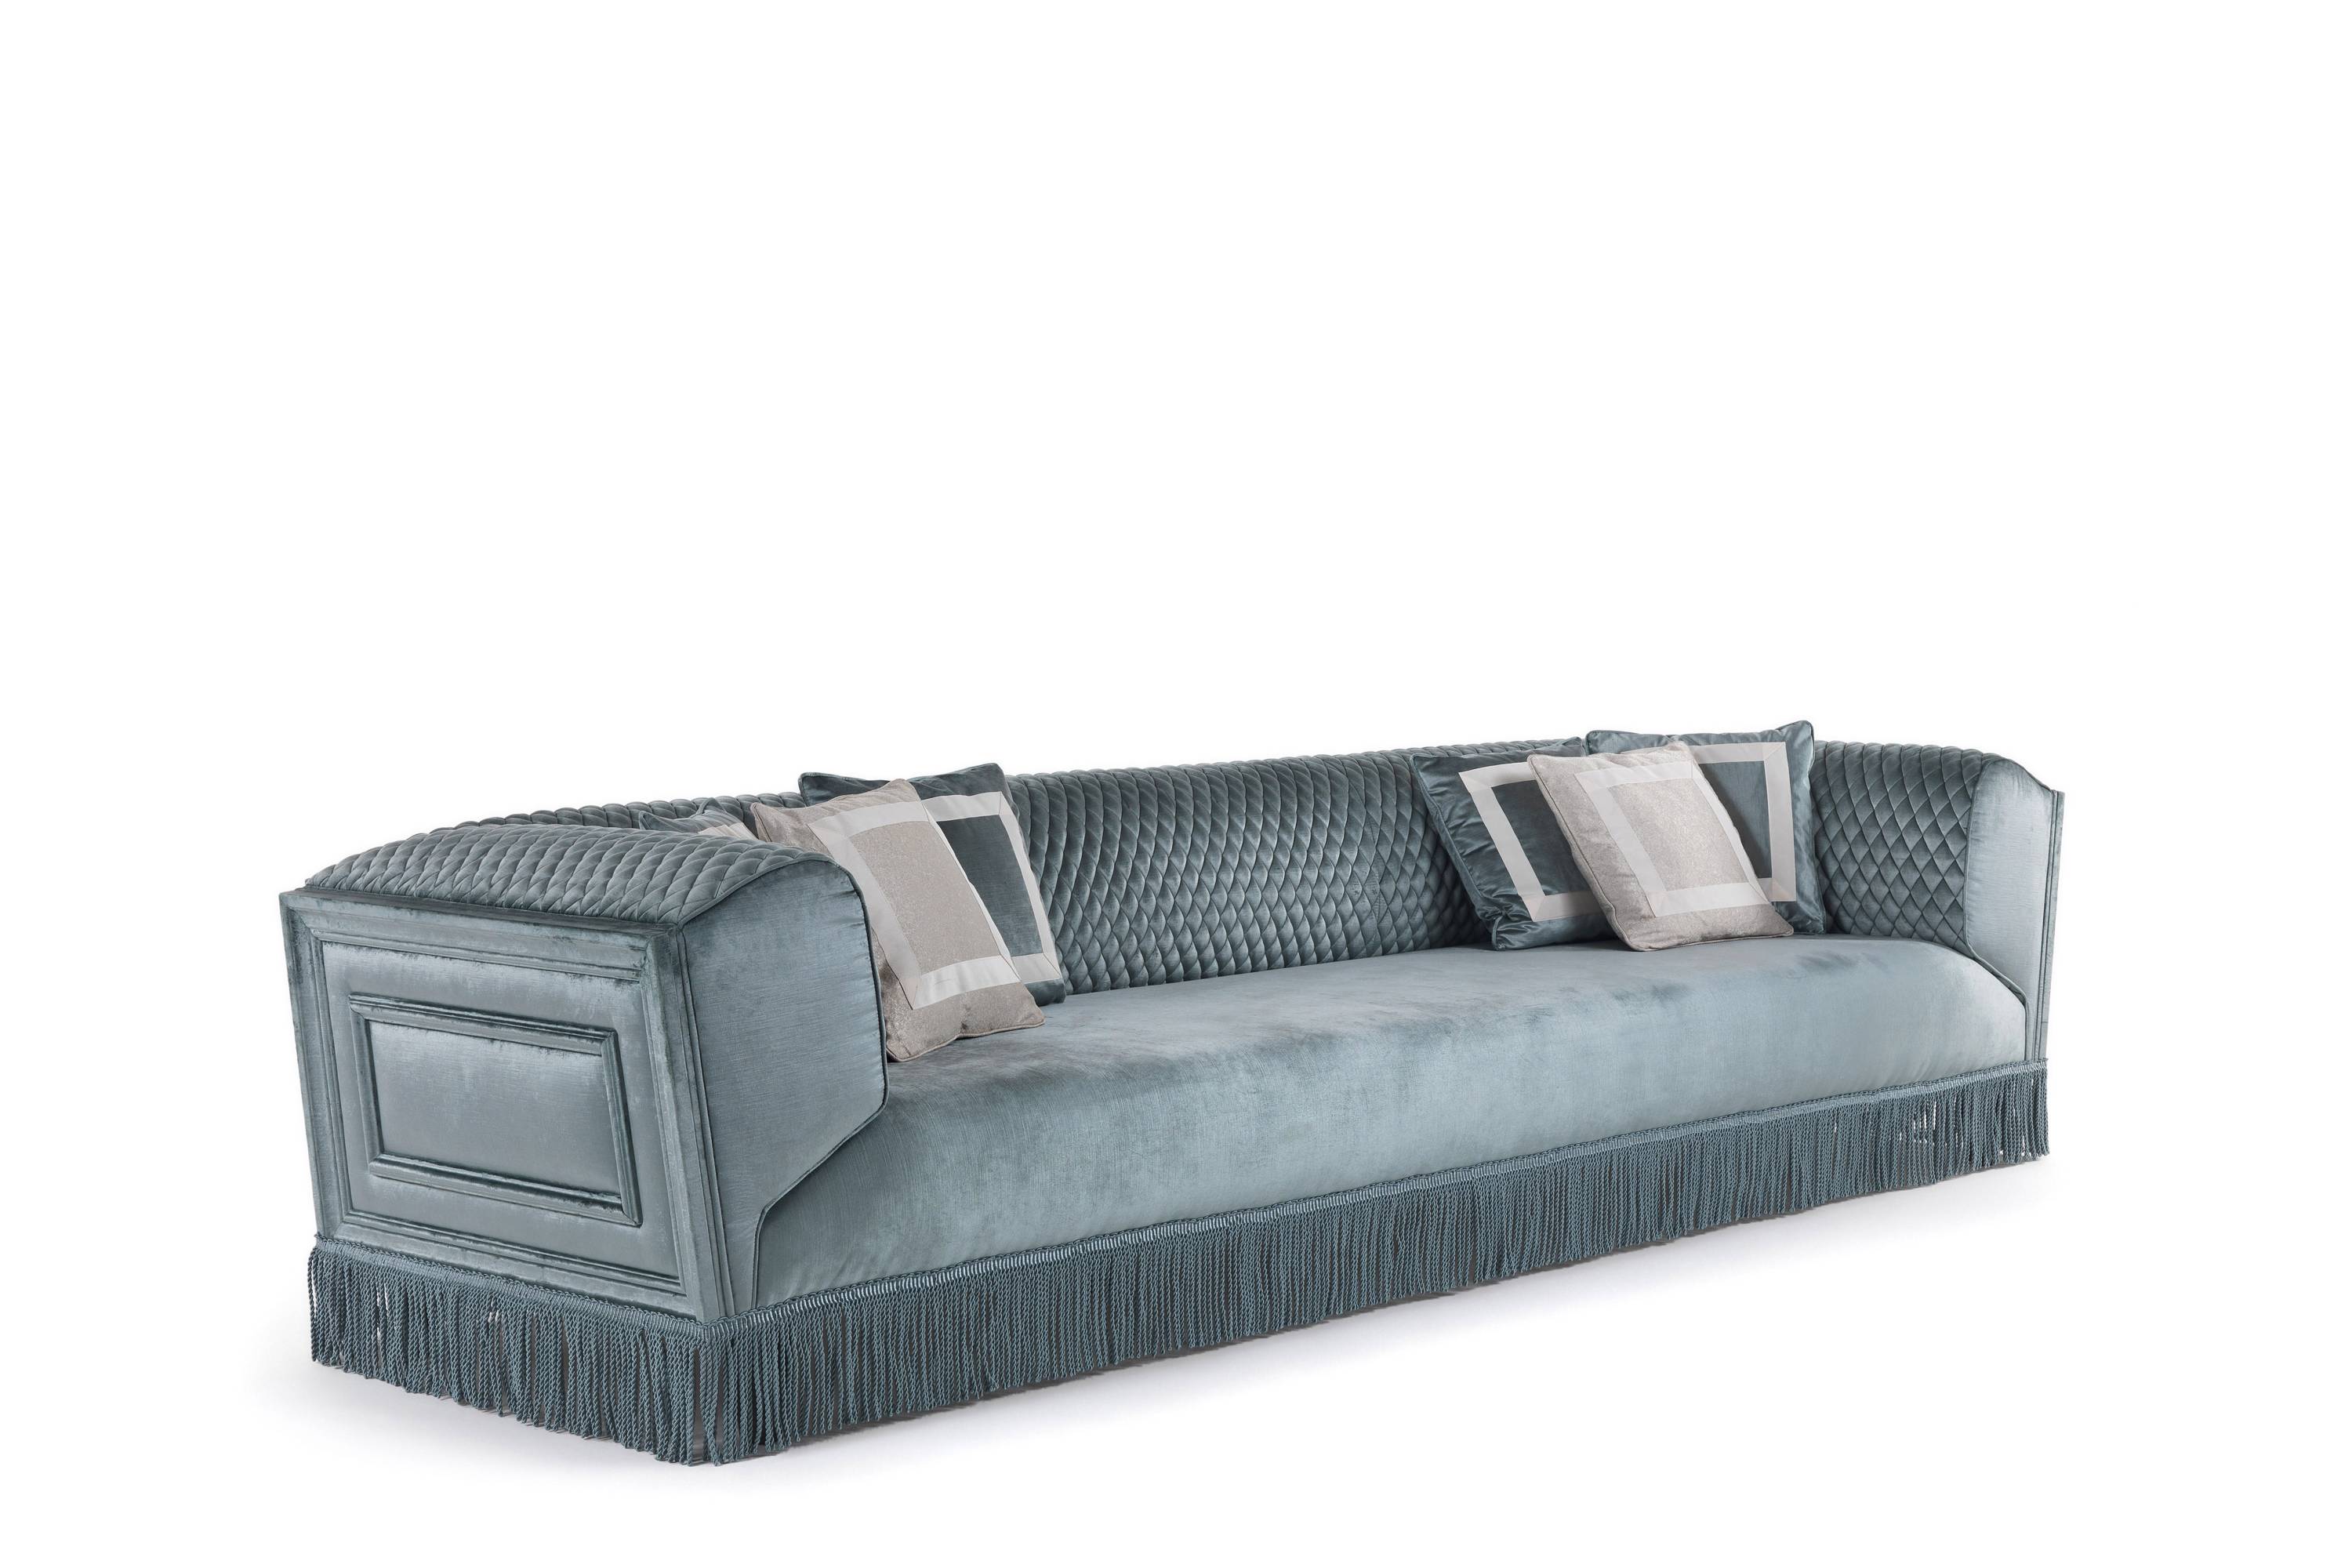 SATURNO 2-seater sofa - 3-seater sofa - armchair – Jumbo Collection Italian luxury classic sofas. tailor-made interior design projects to meet all your furnishing needs